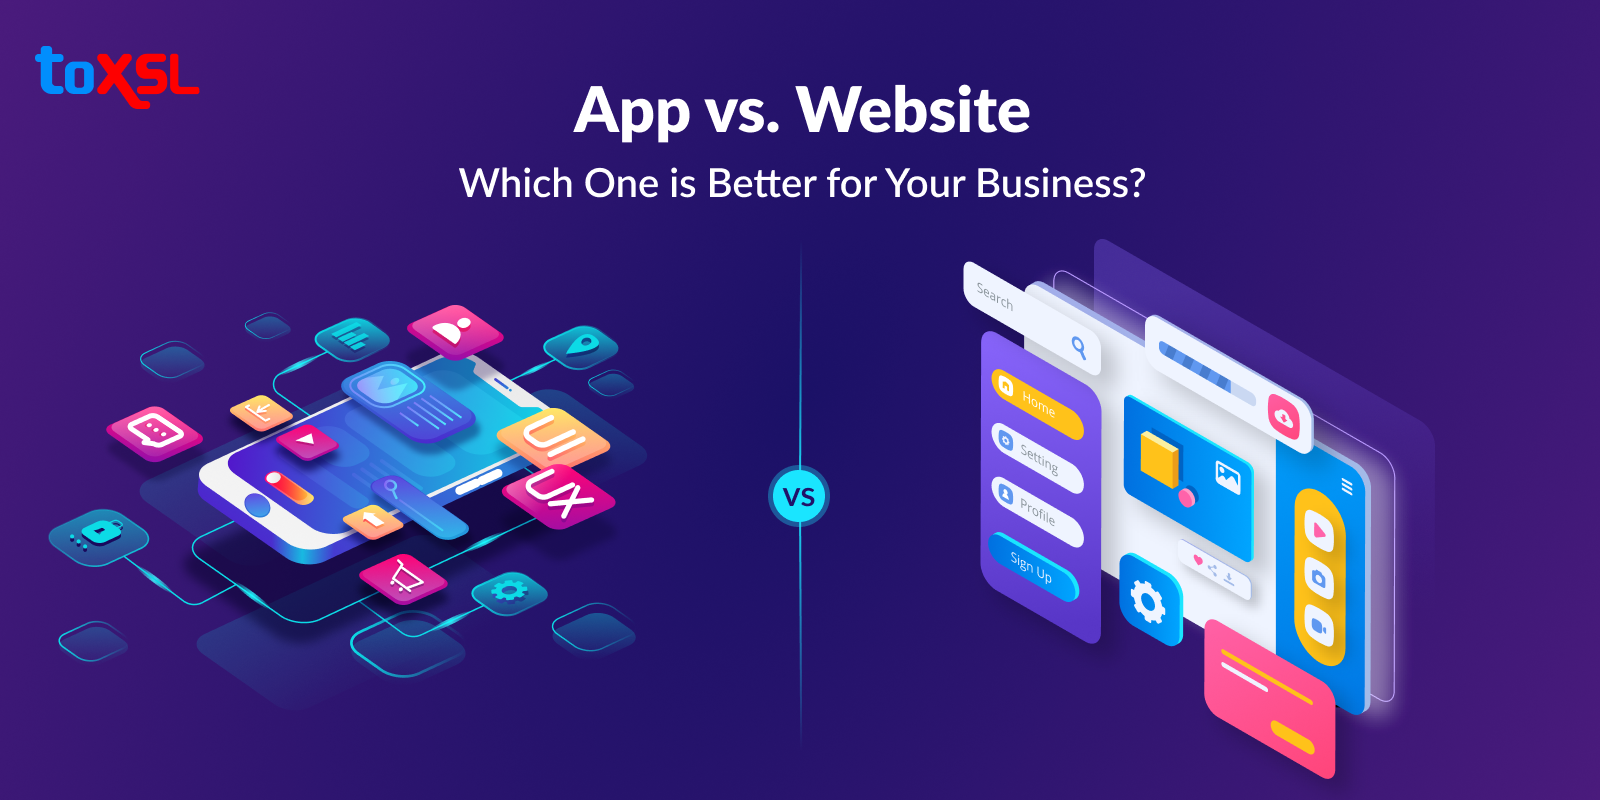 App vs. Website: Which One is Better for Your Business?